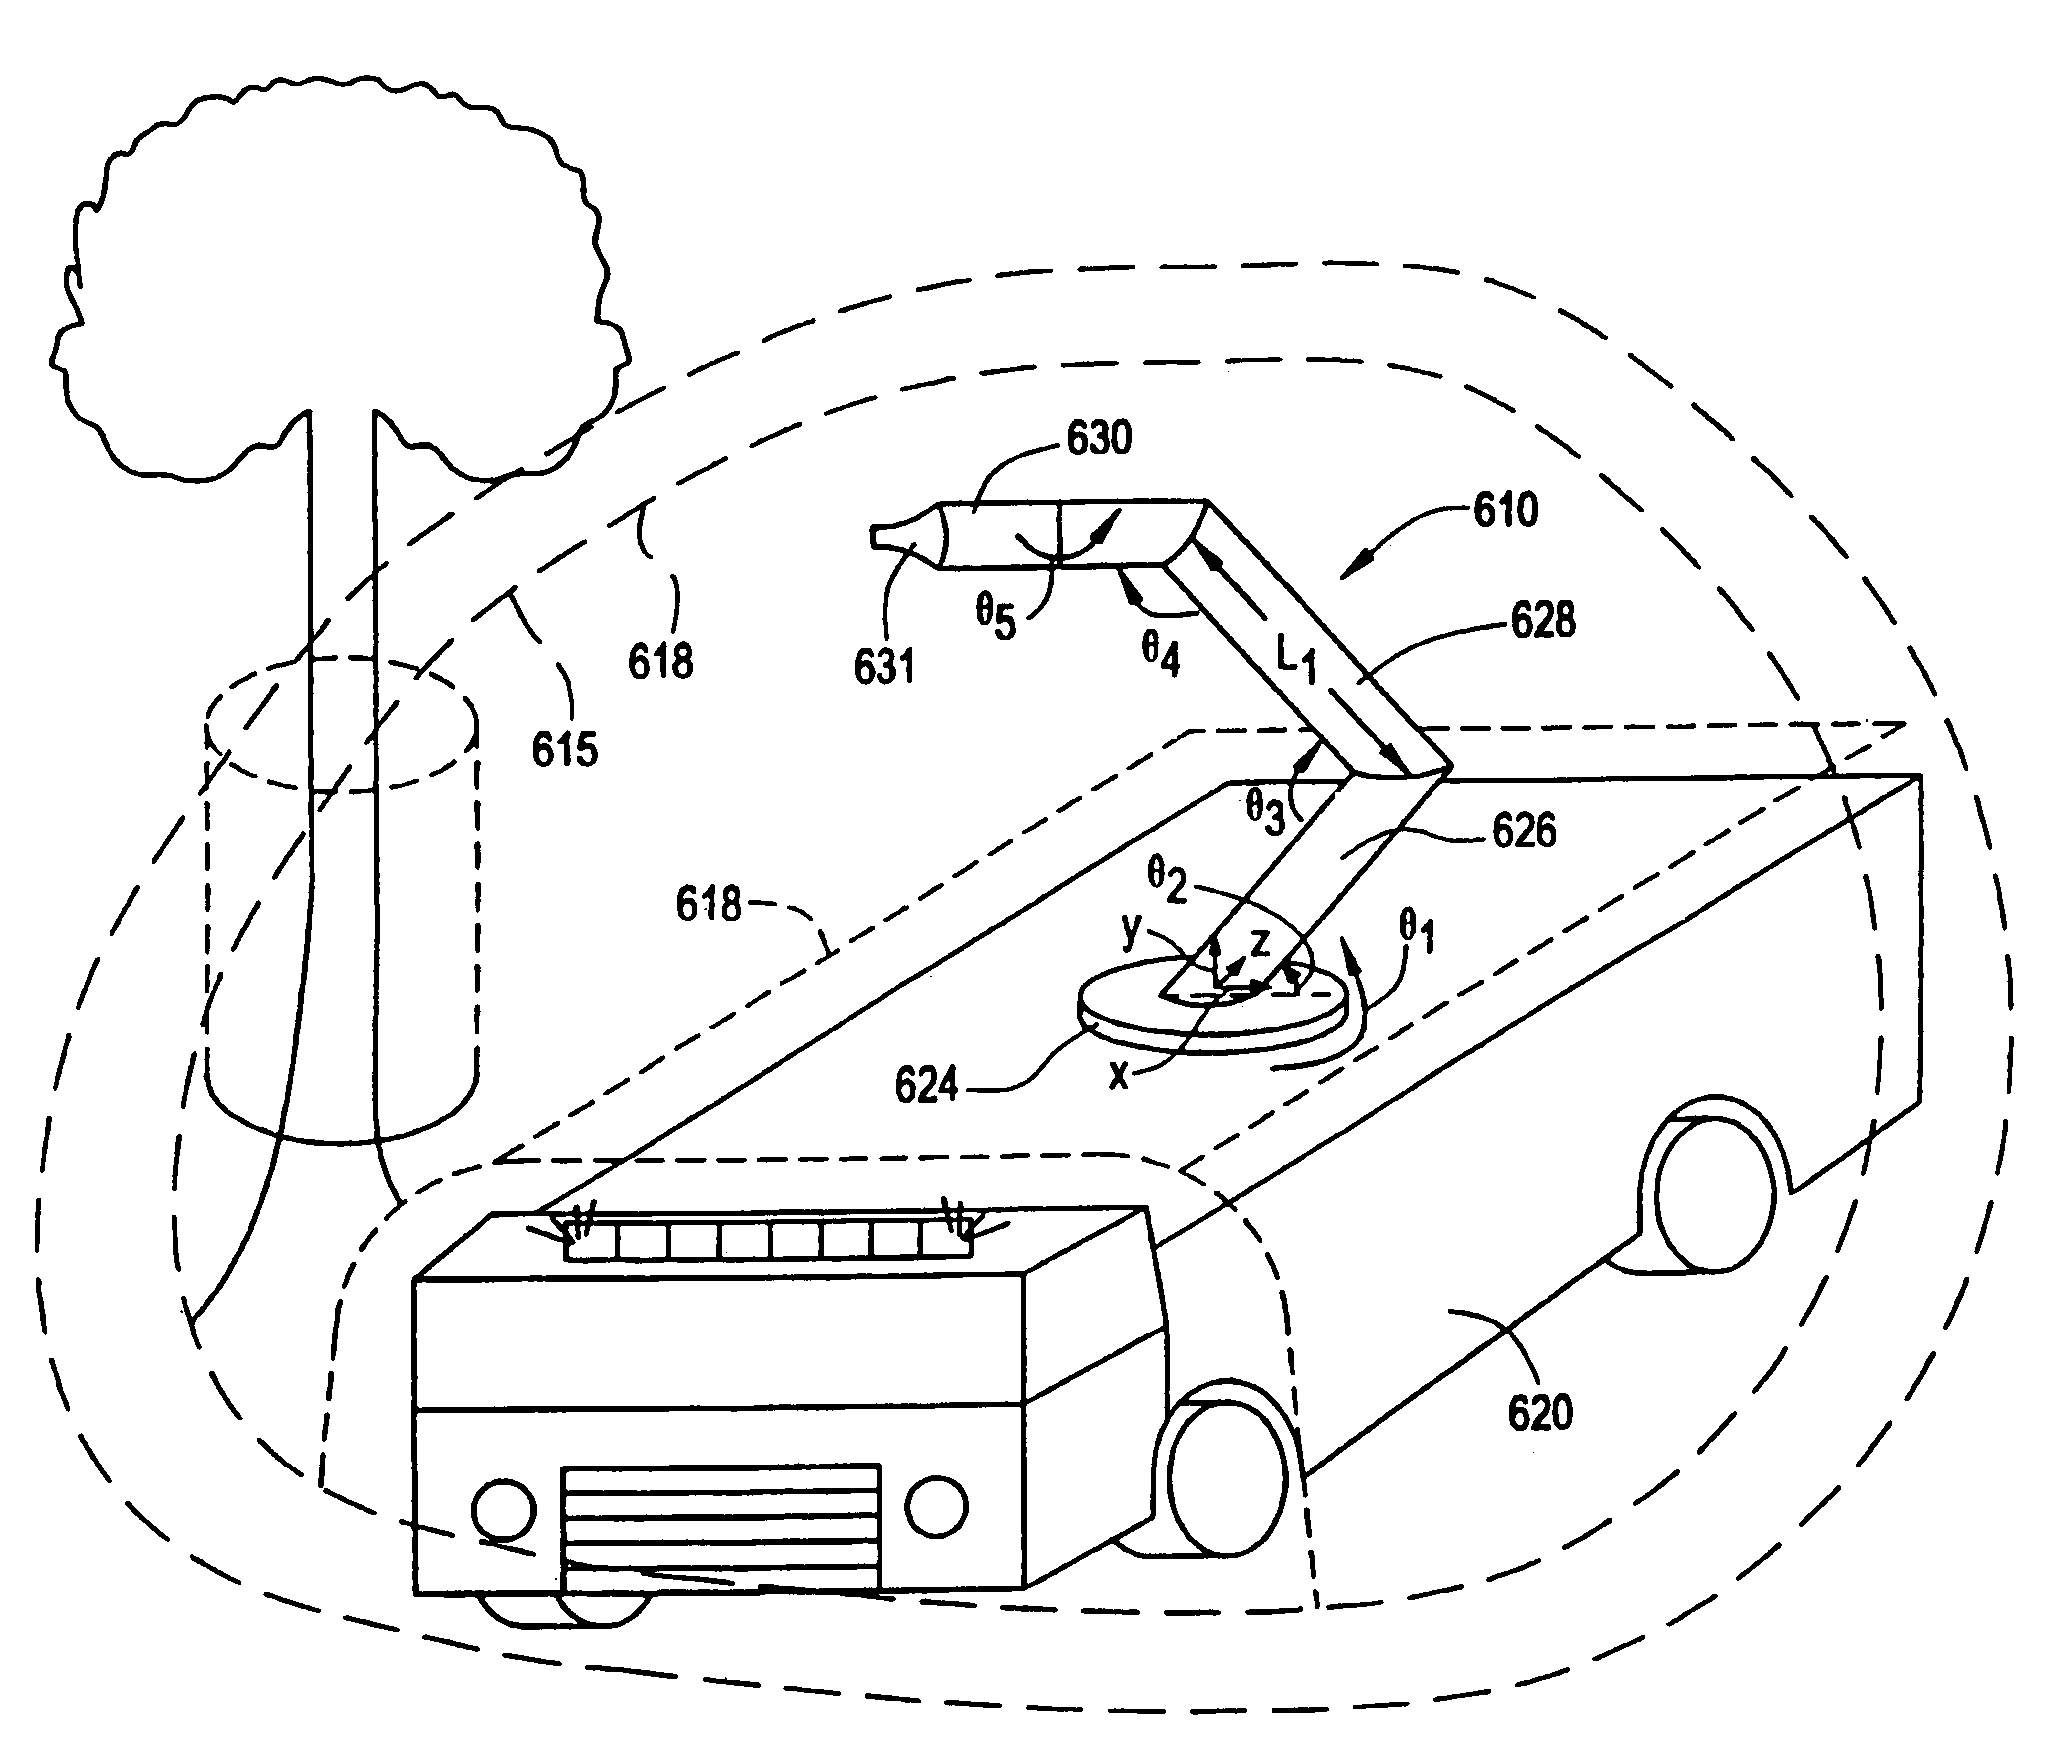 Turret control system based on stored position for a fire fighting vehicle